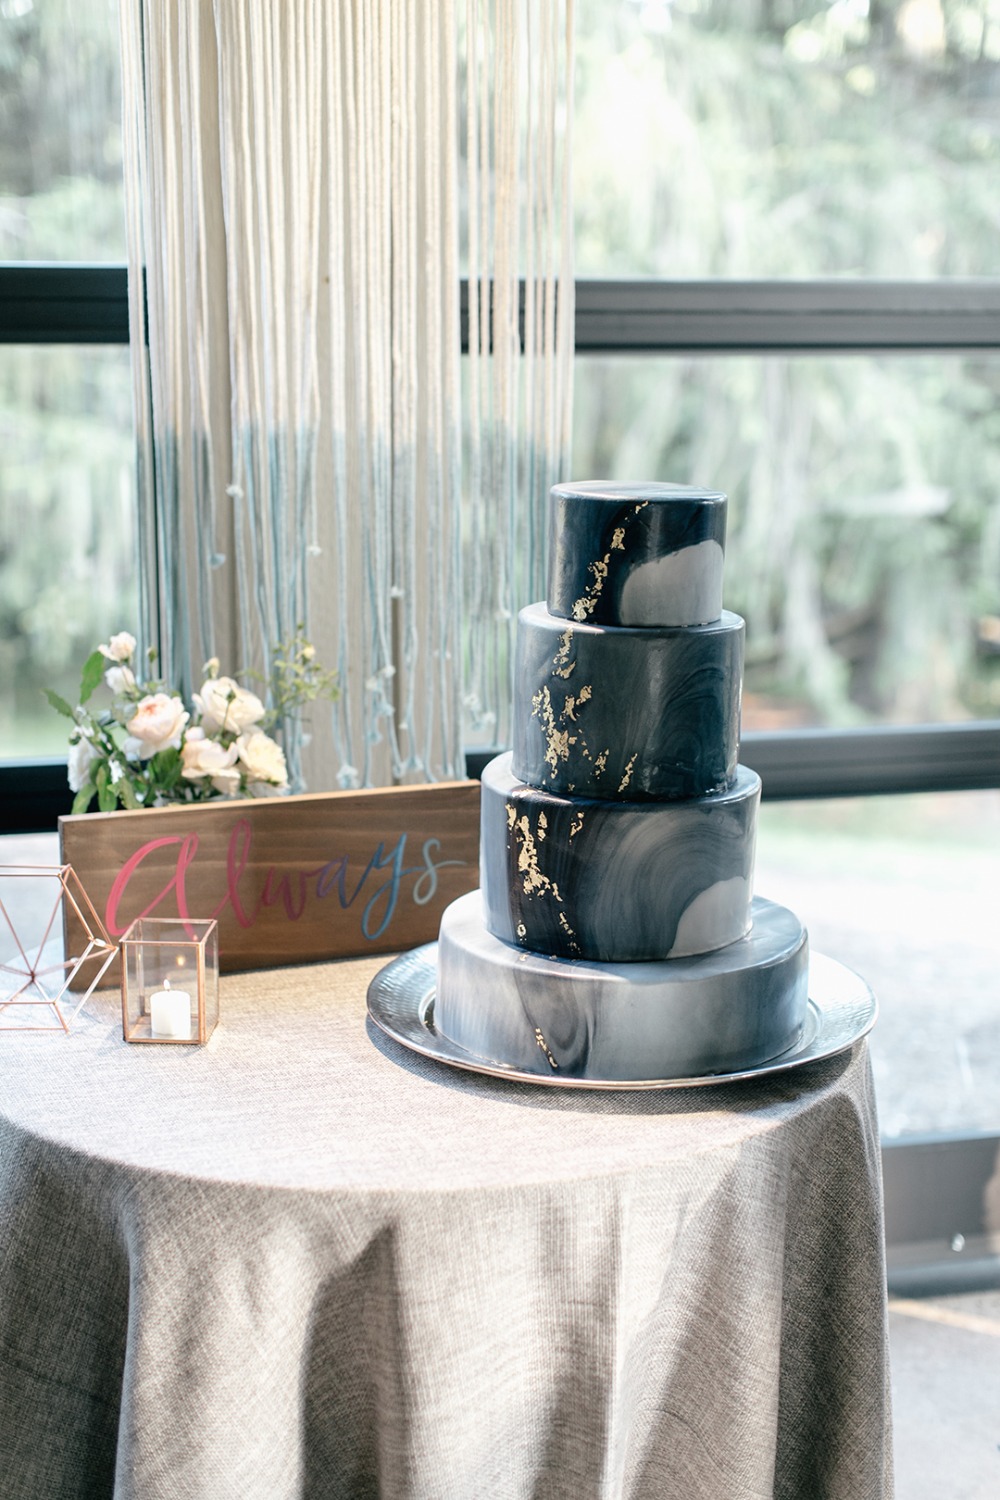 Geode wedding cake with gold foiling